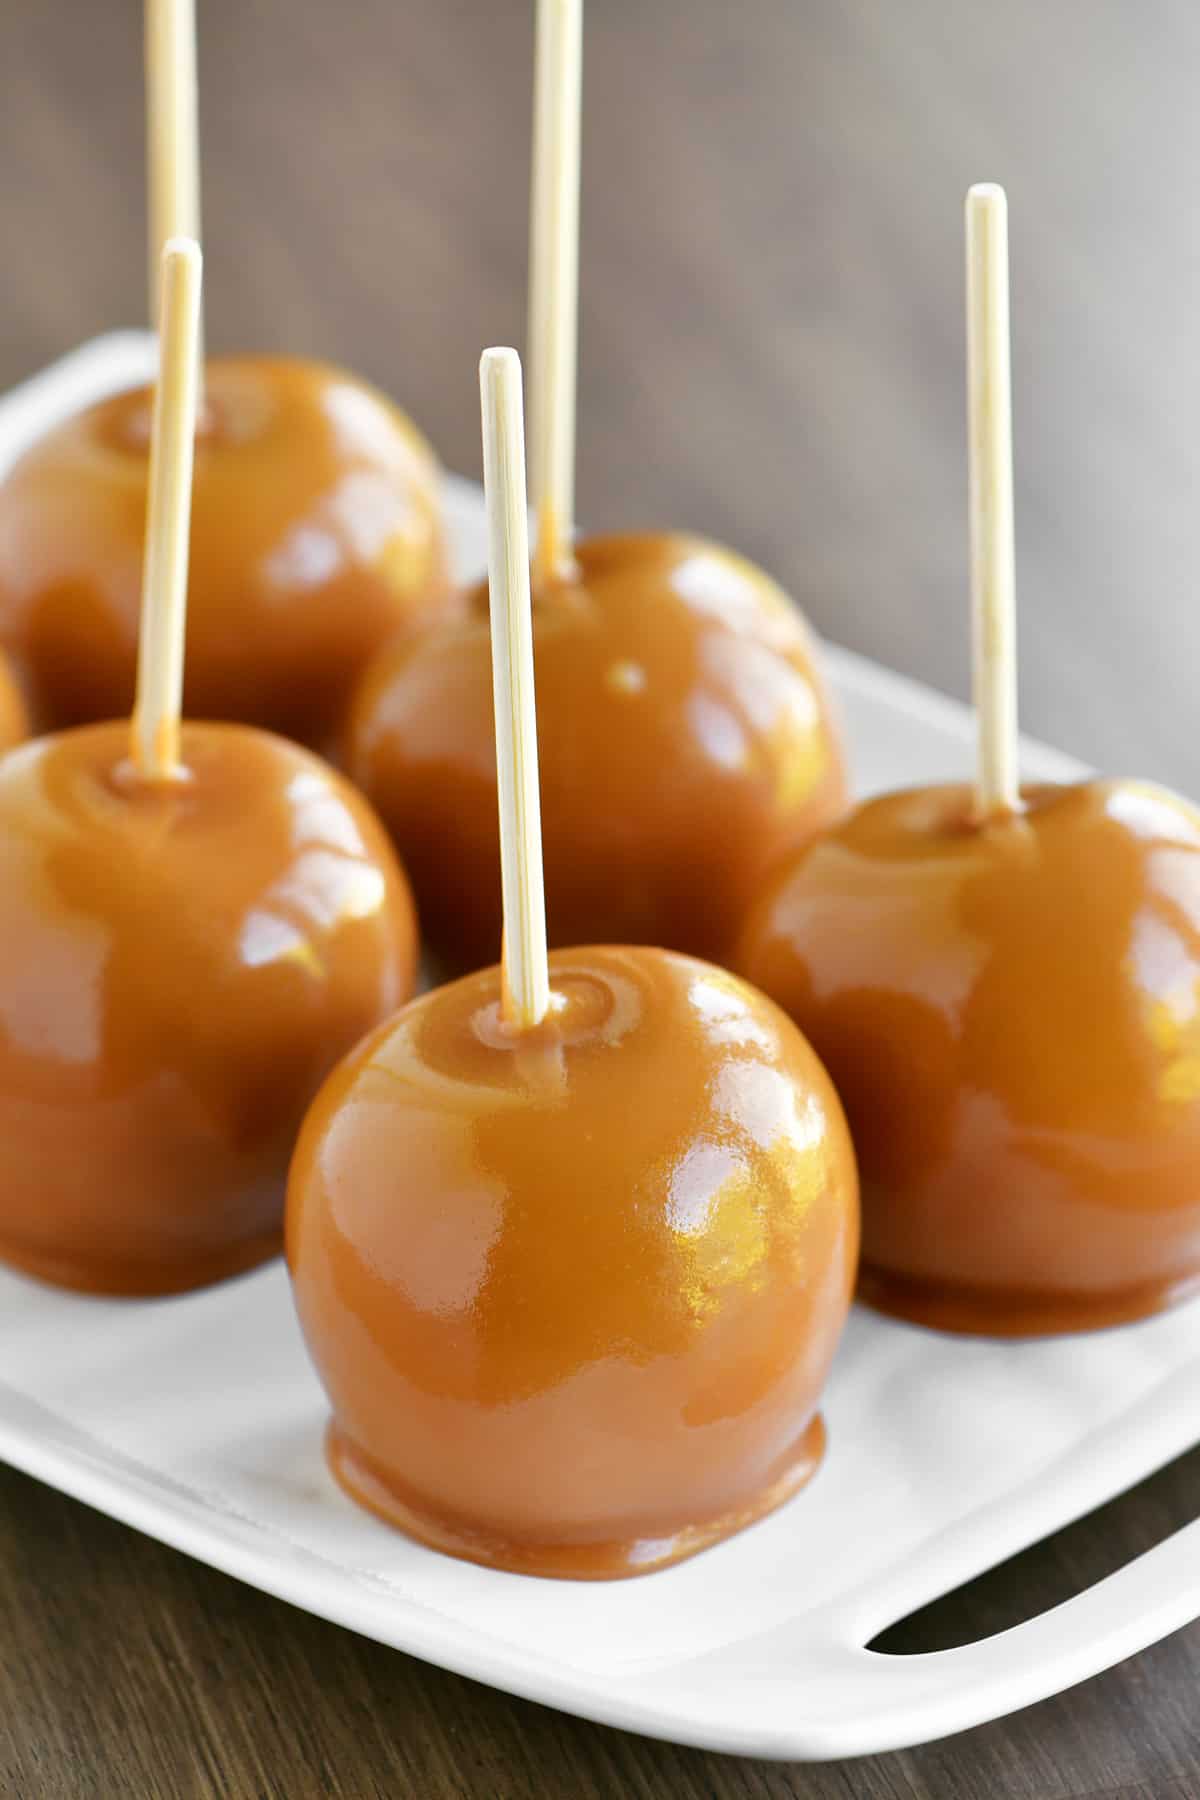 a close-up photo of caramel apples on a tray